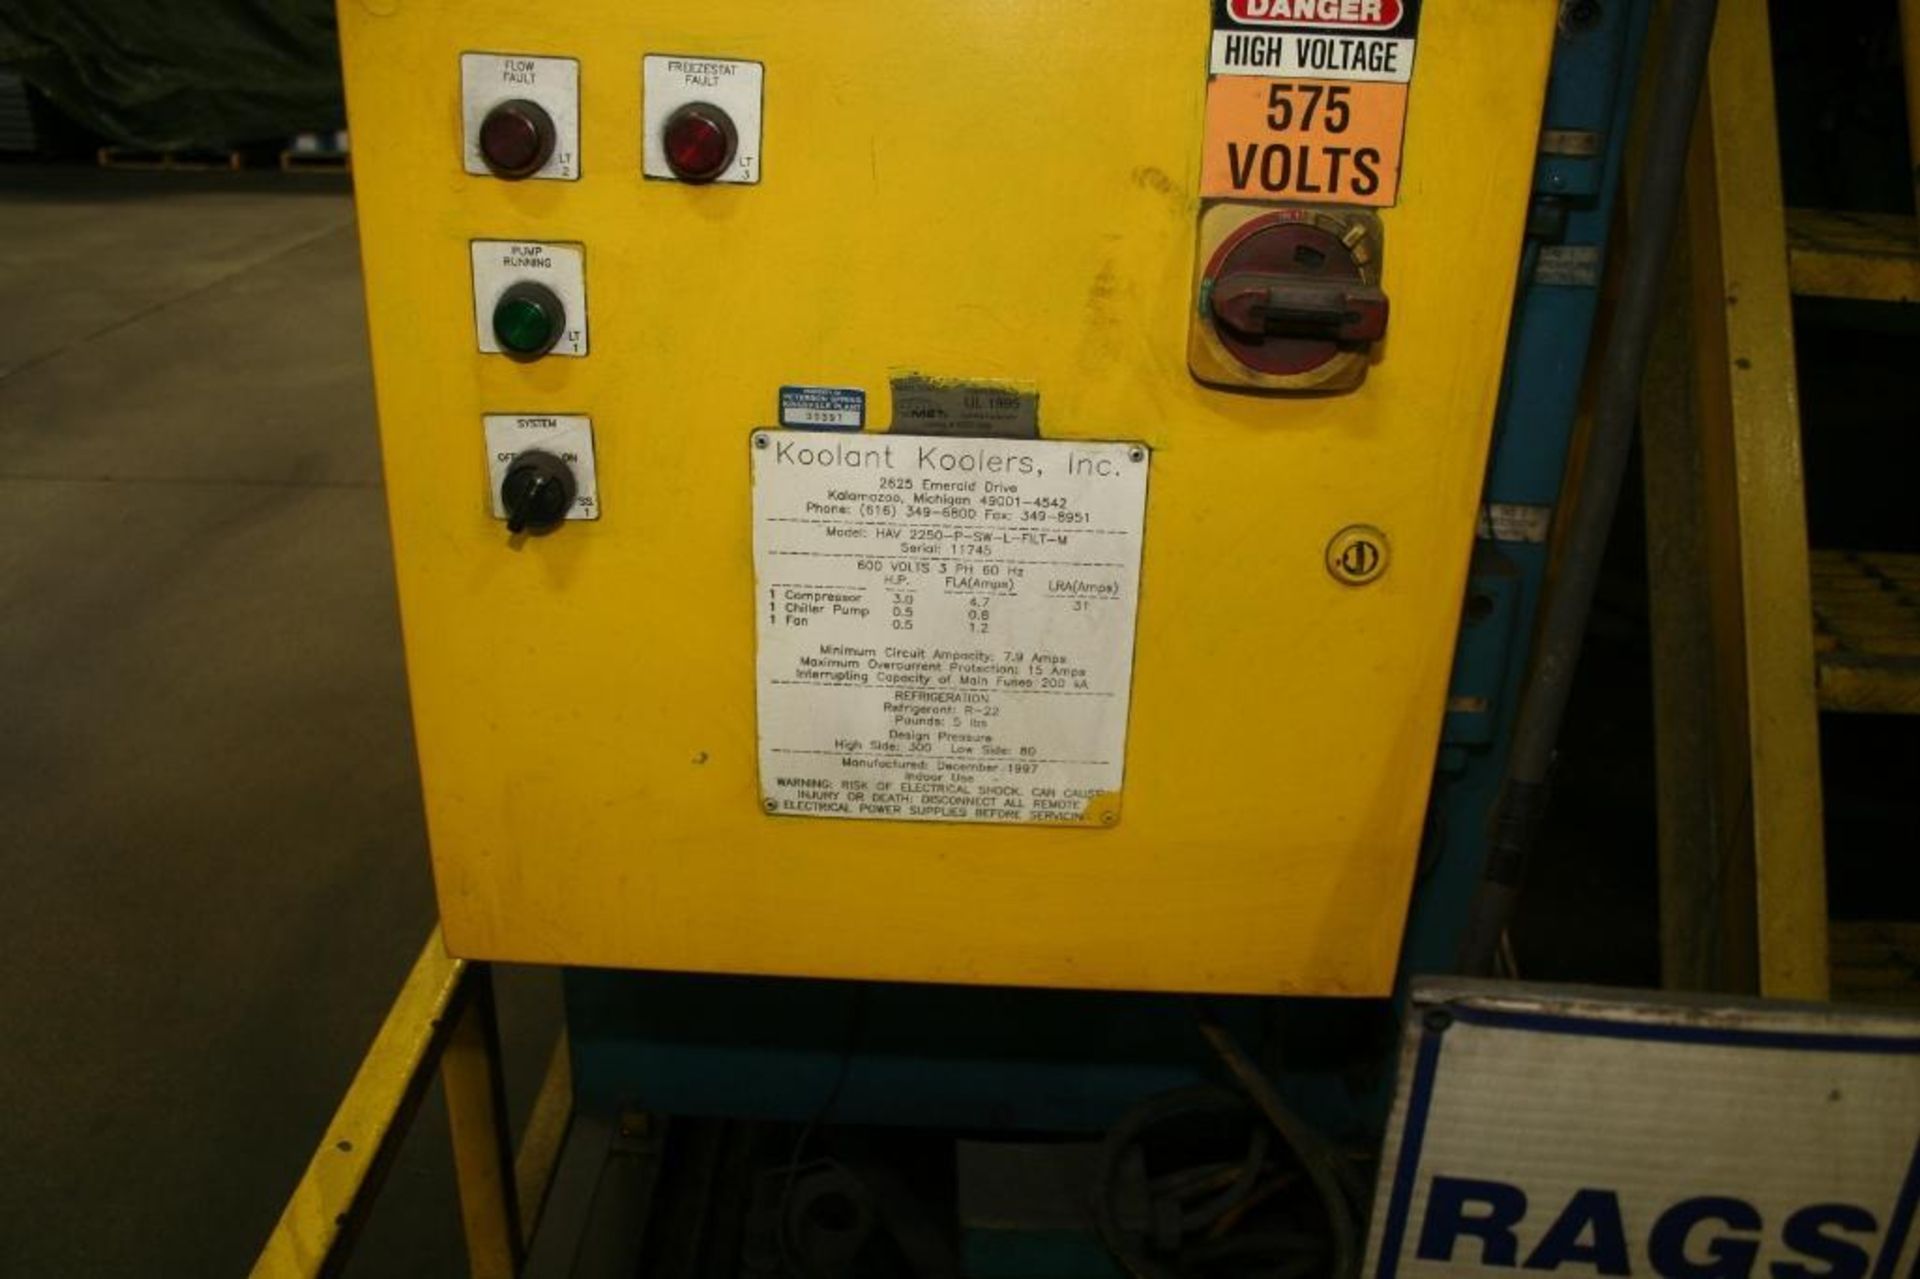 Pyromaitre Turbo Rotary Oven Model TD 60-IG, Pyro Oven, Serial# 980103, 4 Lane, Located at 208 Wigle - Image 7 of 10